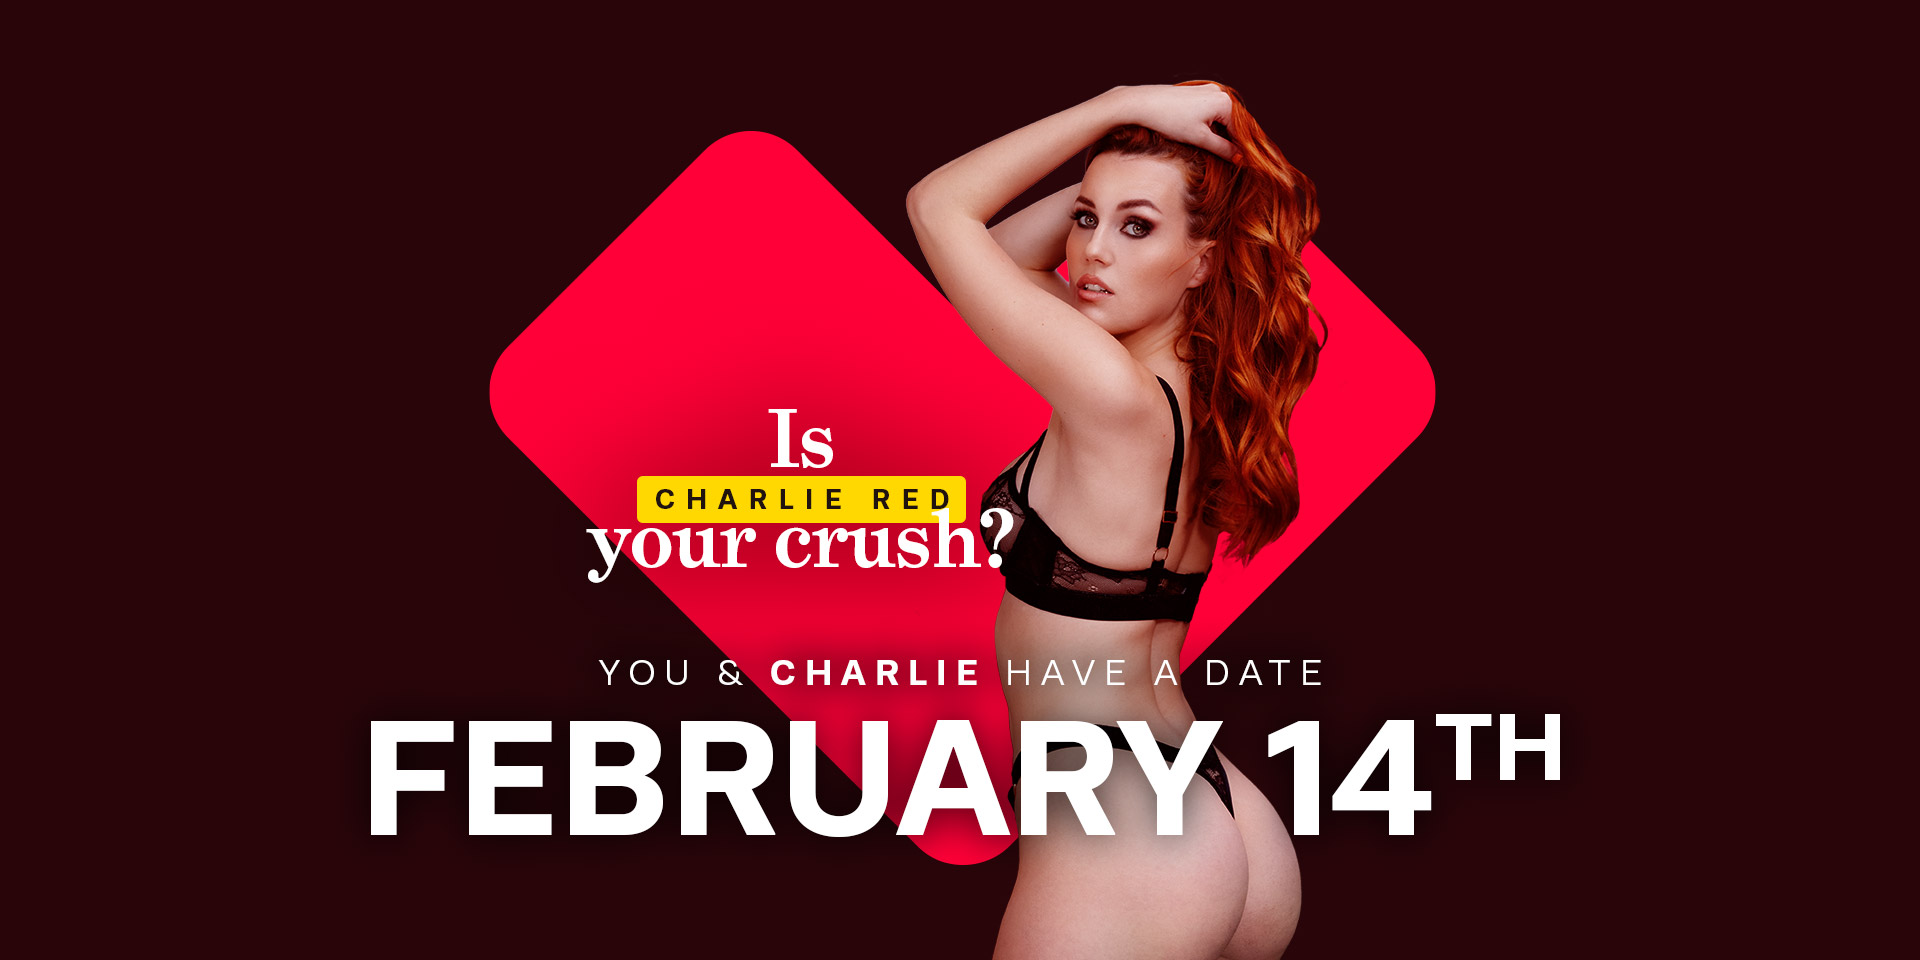 You & Charlie Red have a date